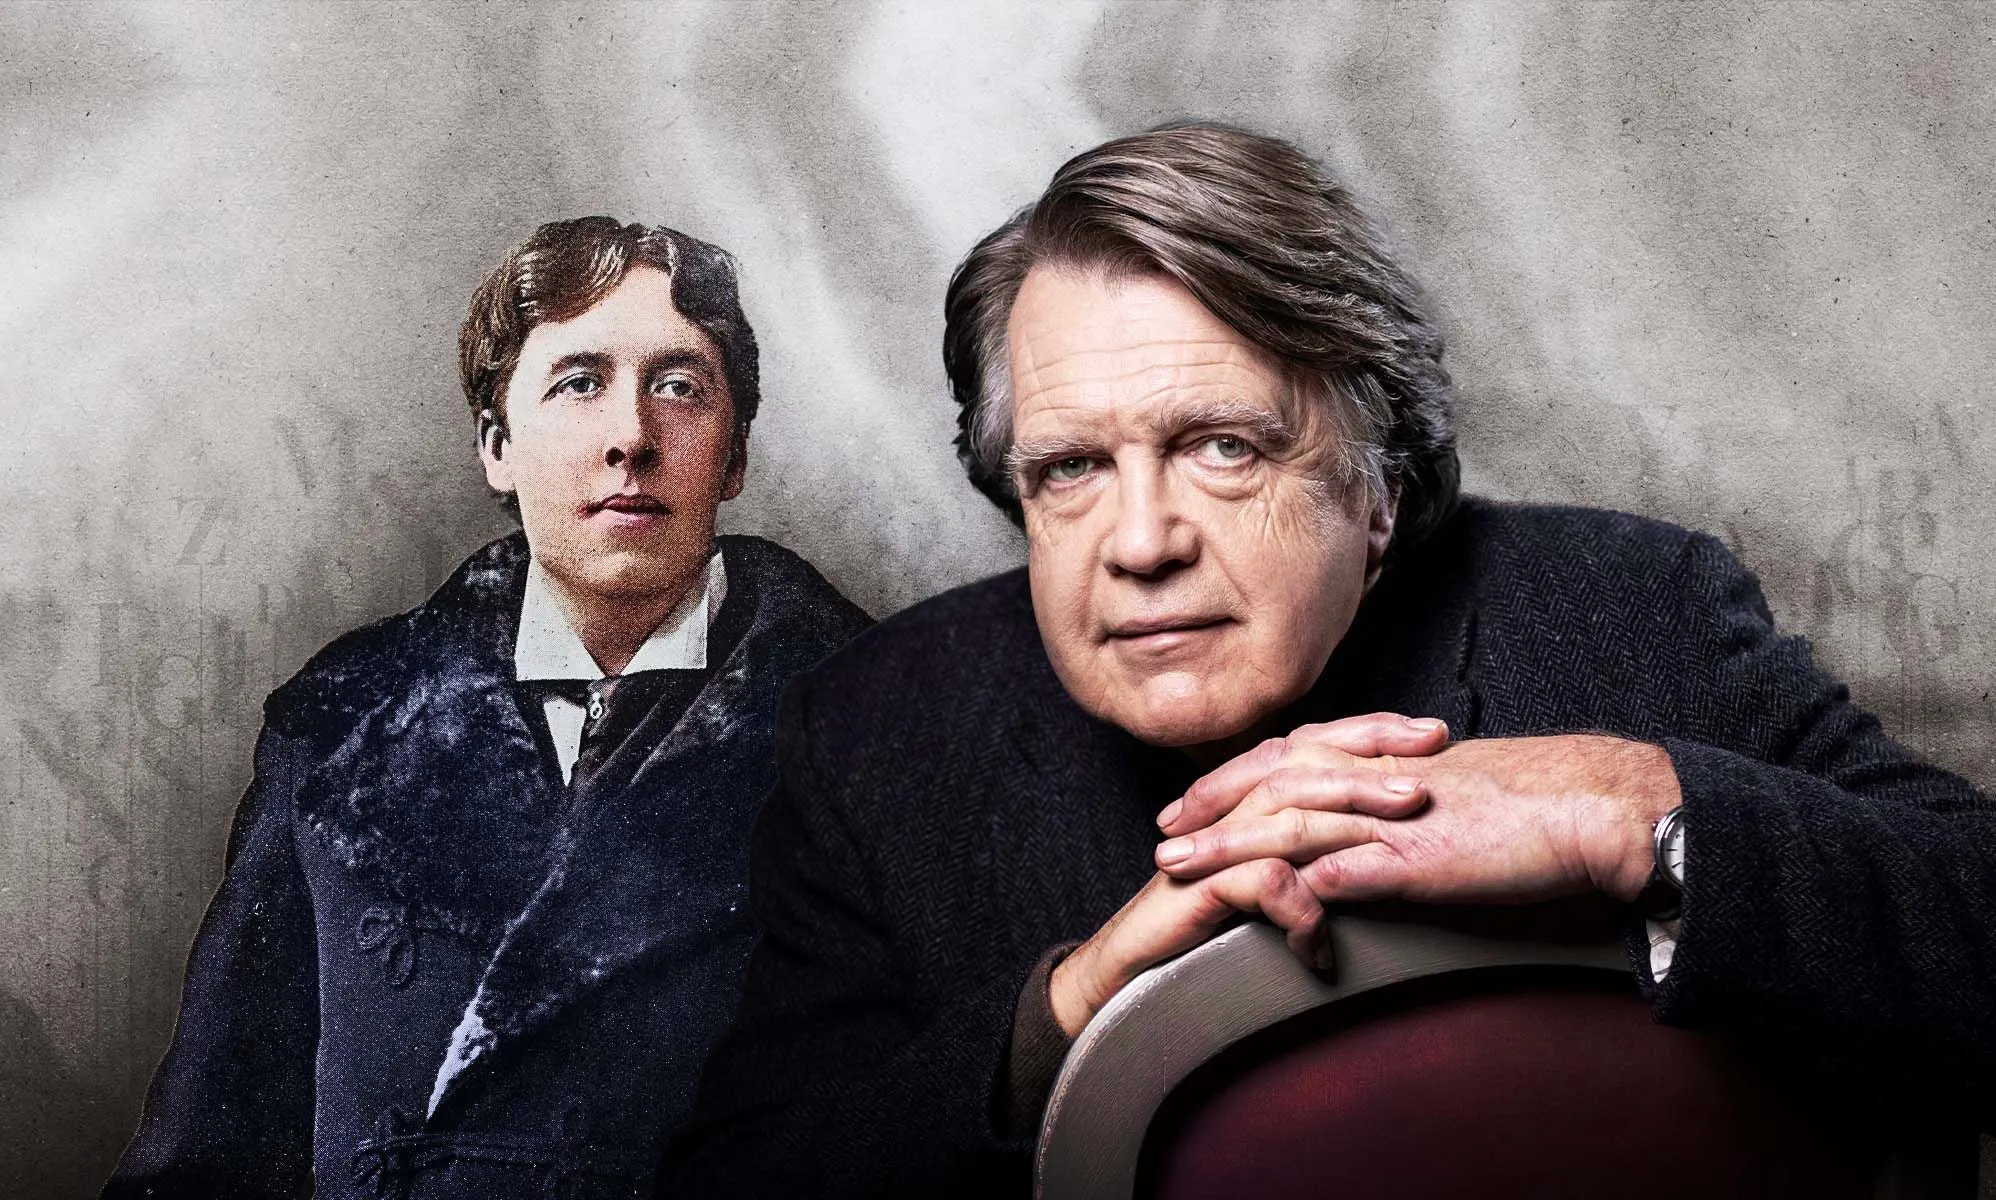 Oscar Wilde's grandson on his trials and legacy